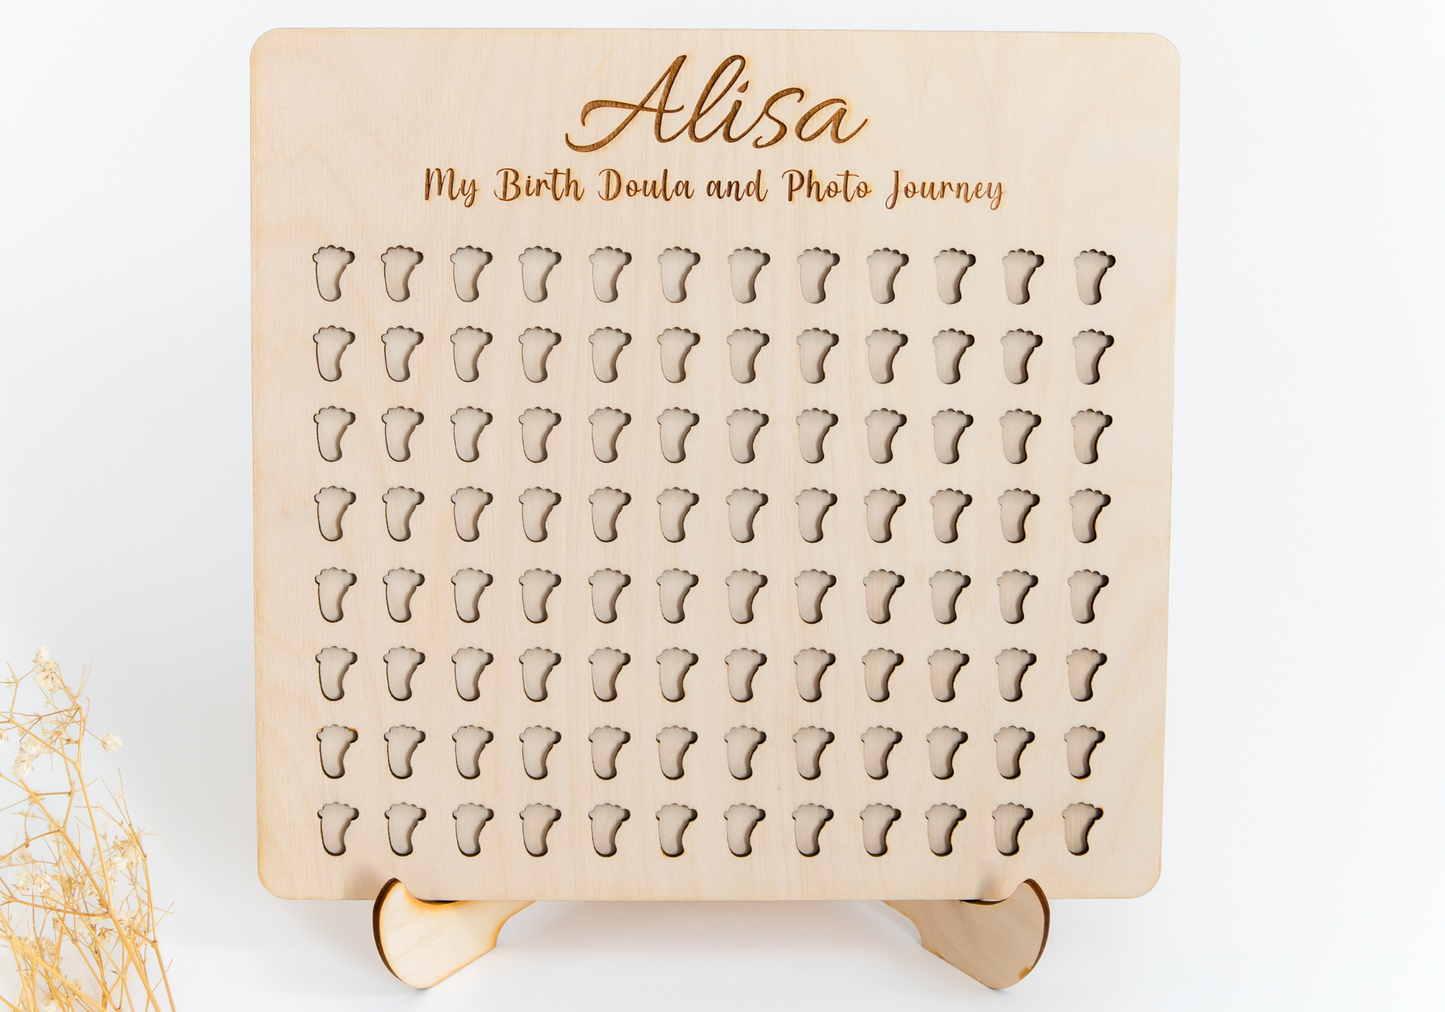 Midwife/Doula Birth Tracker Wooden Board Gift